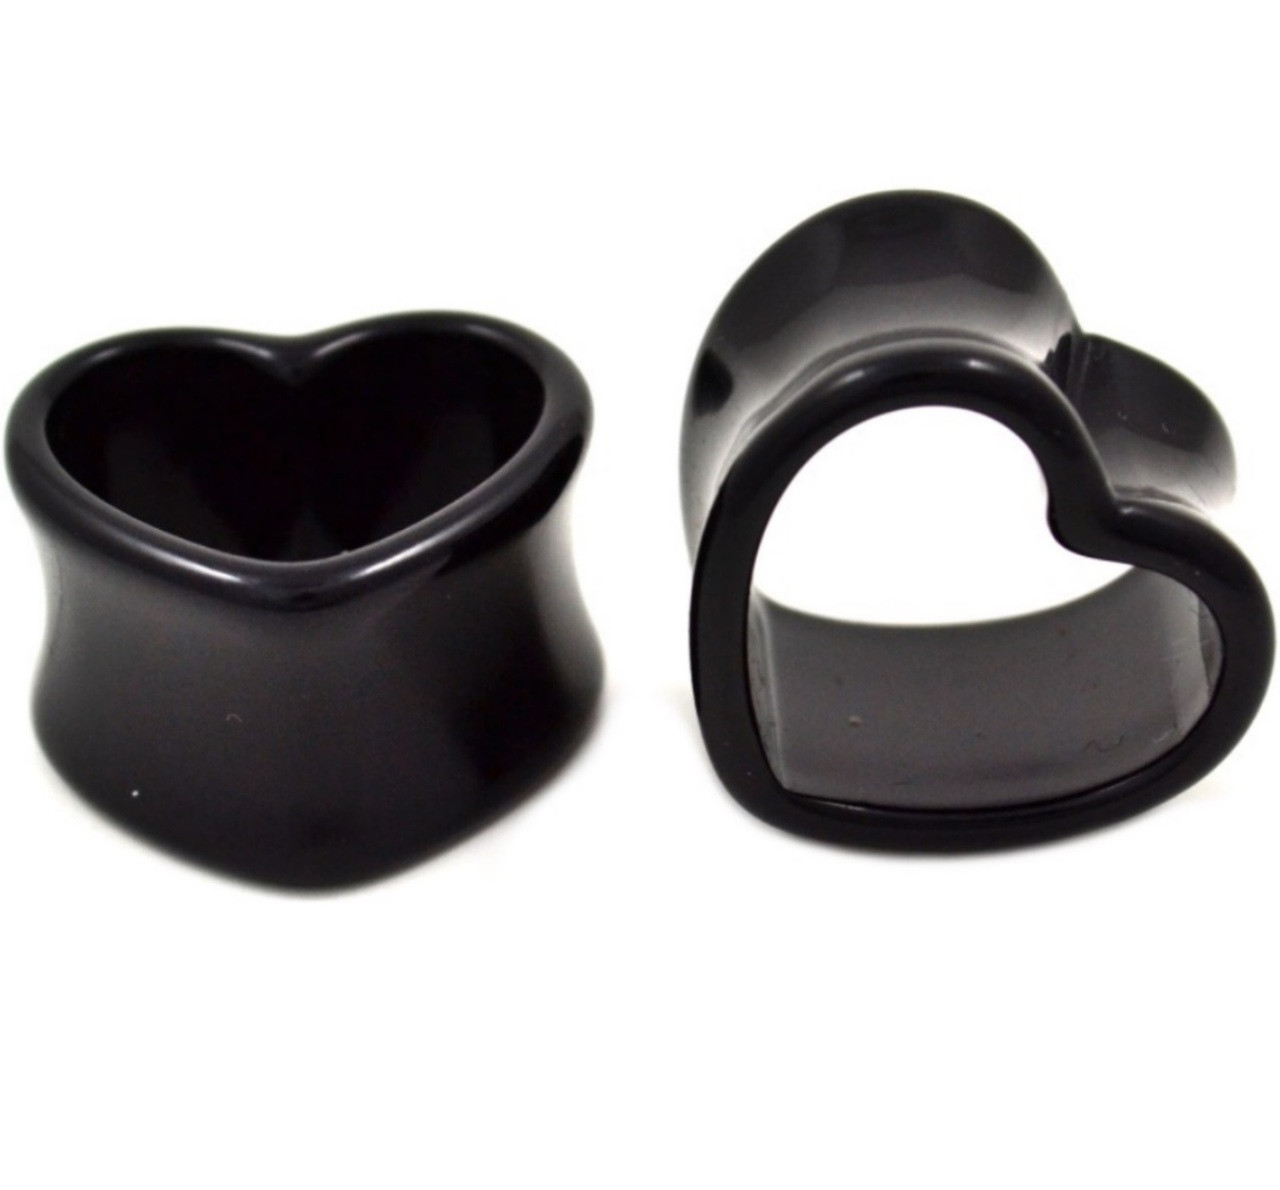 Black Acrylic Heart Tunnels 0g 8mm Sold As a Pair 